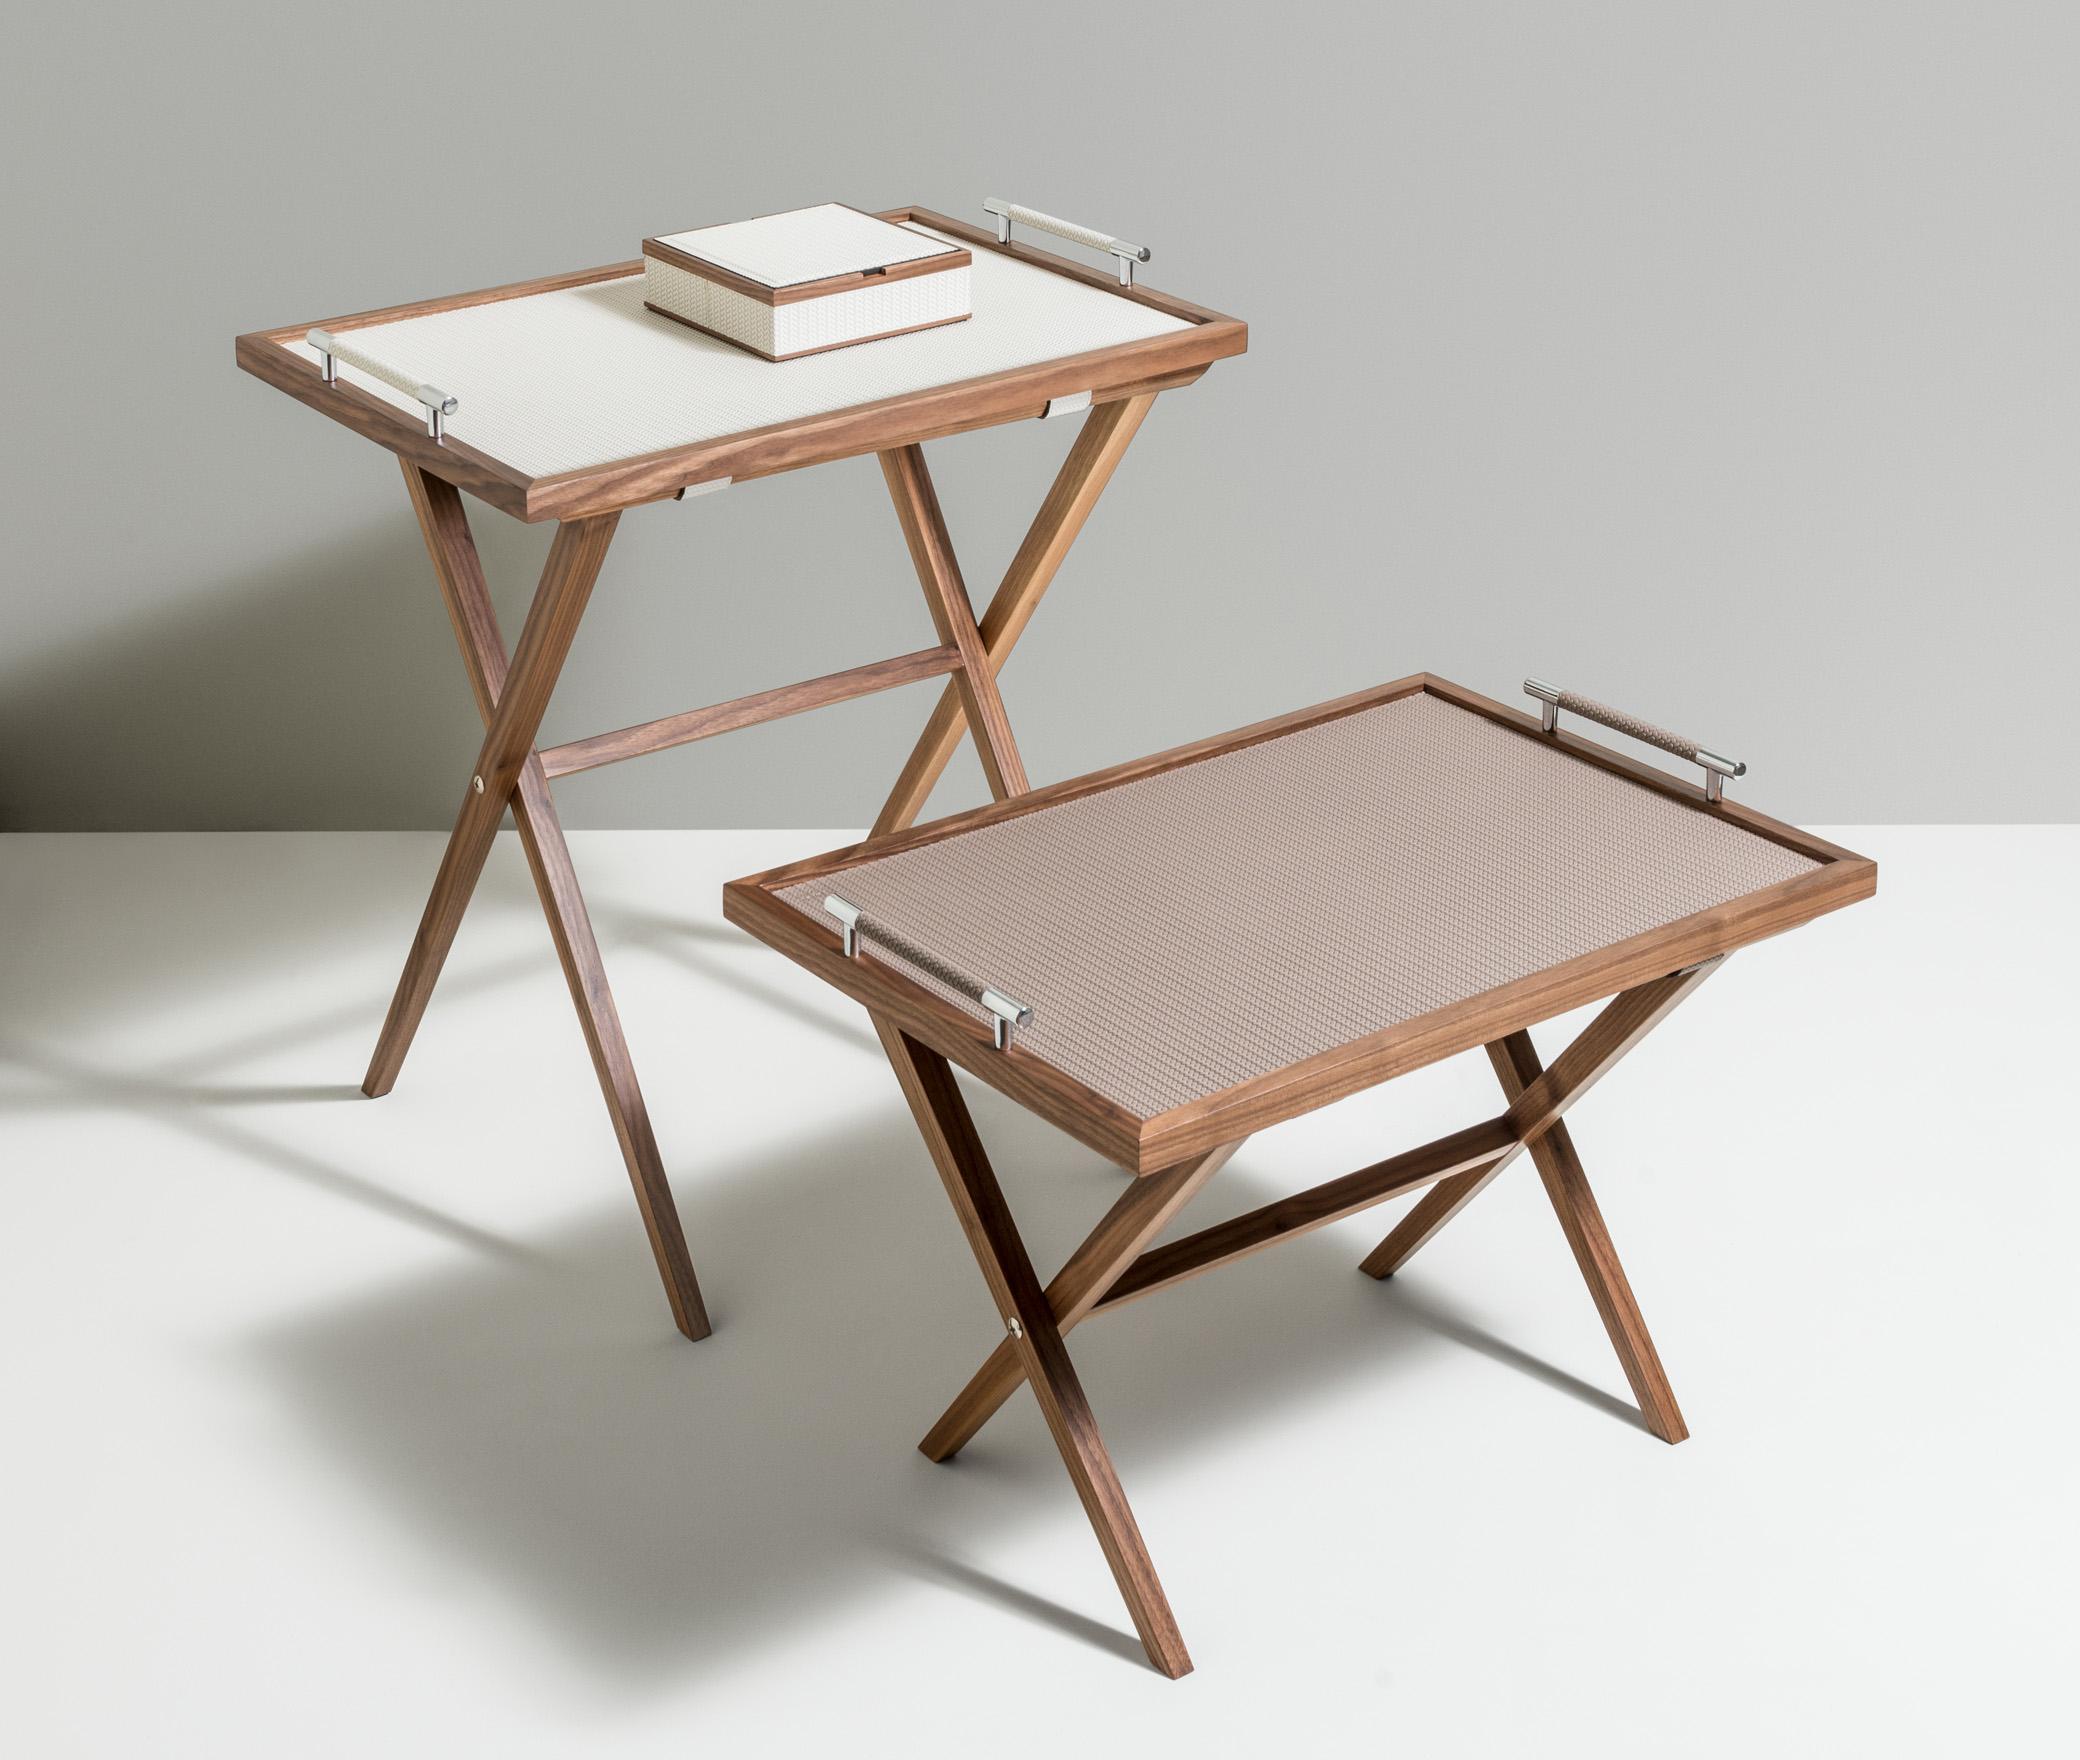 Modern 21st Century Leather & Walnut Wood Dedalo Folding Table Handcrafed in Italy For Sale